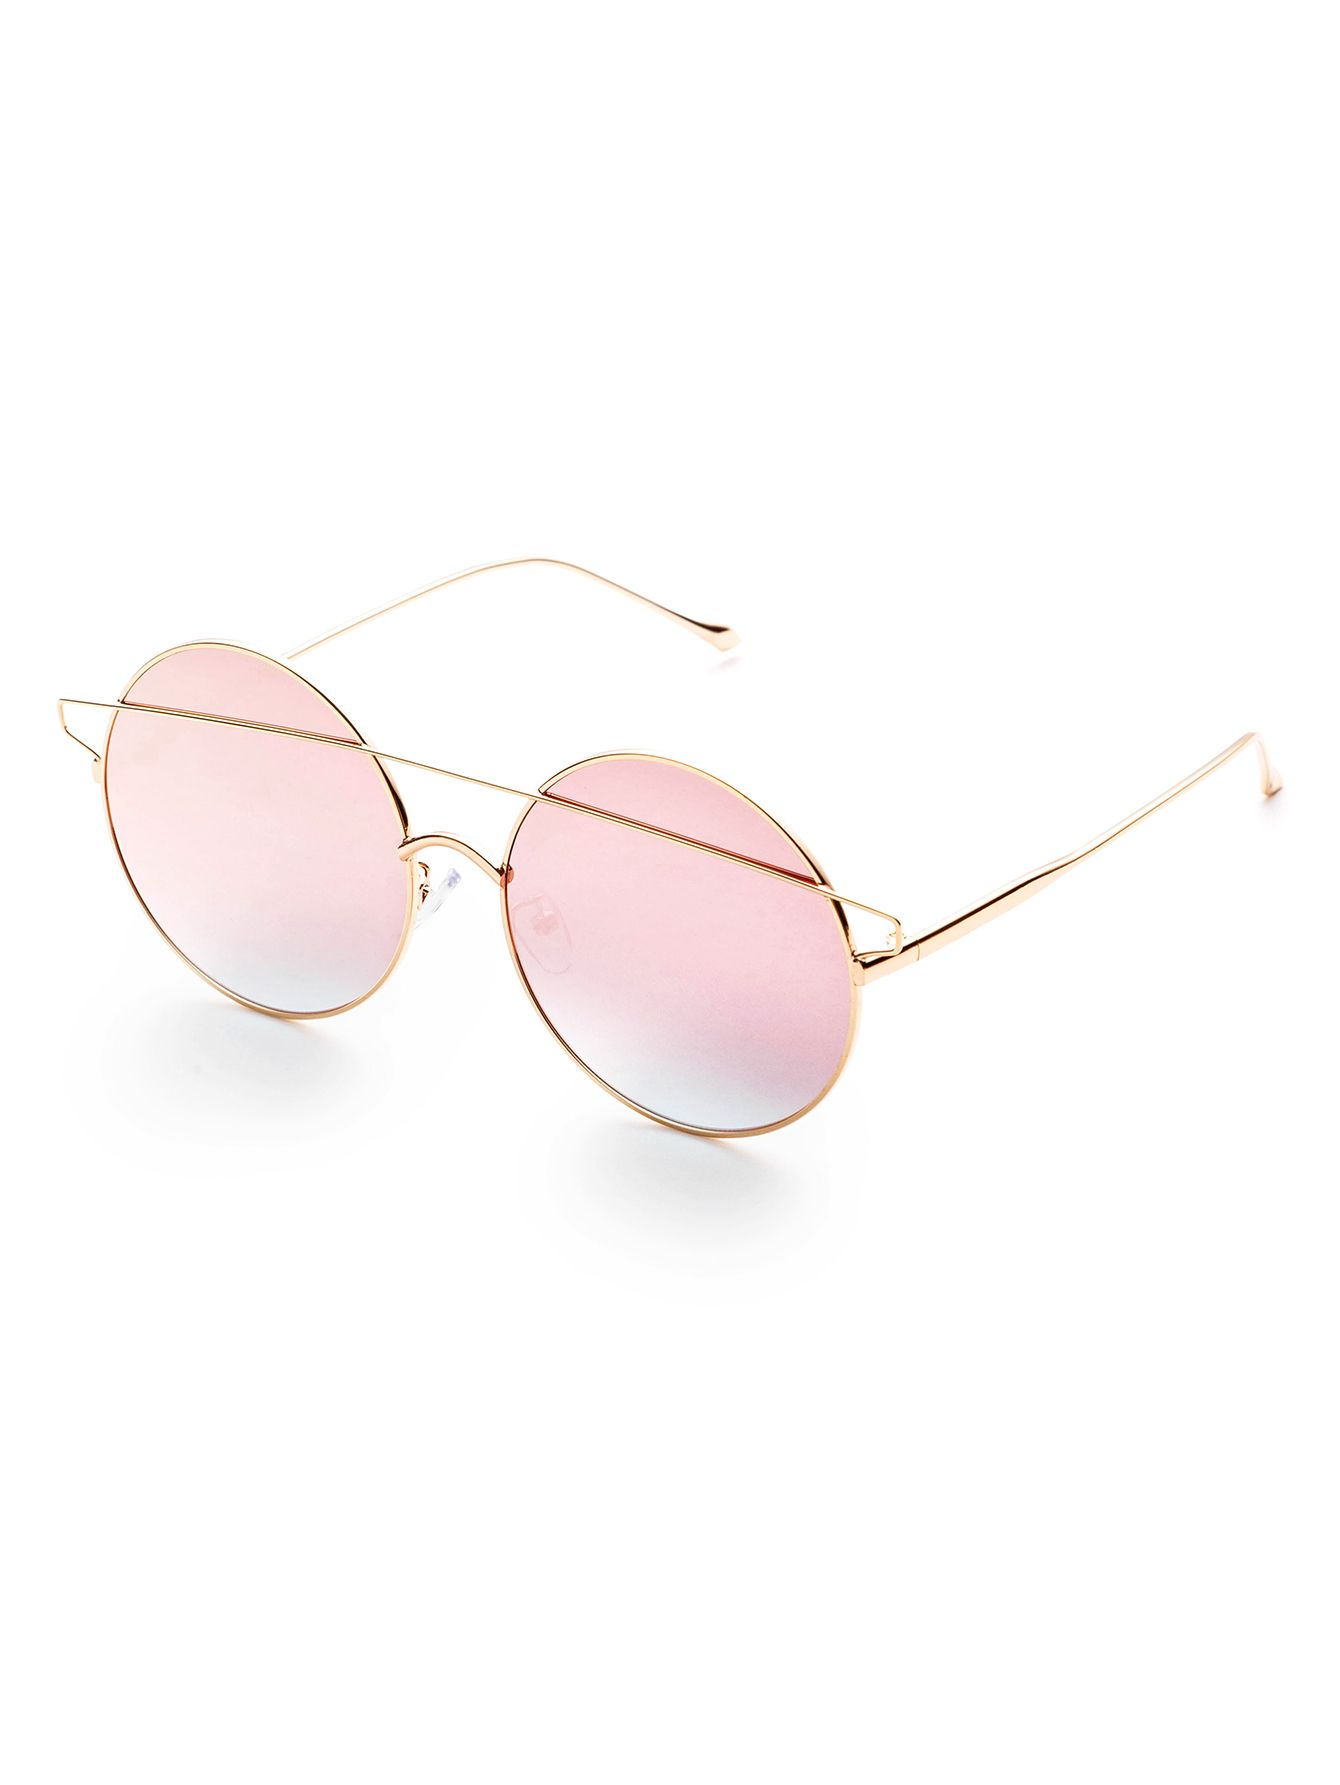 Trendy Round Sunglasses for Chic Accessories